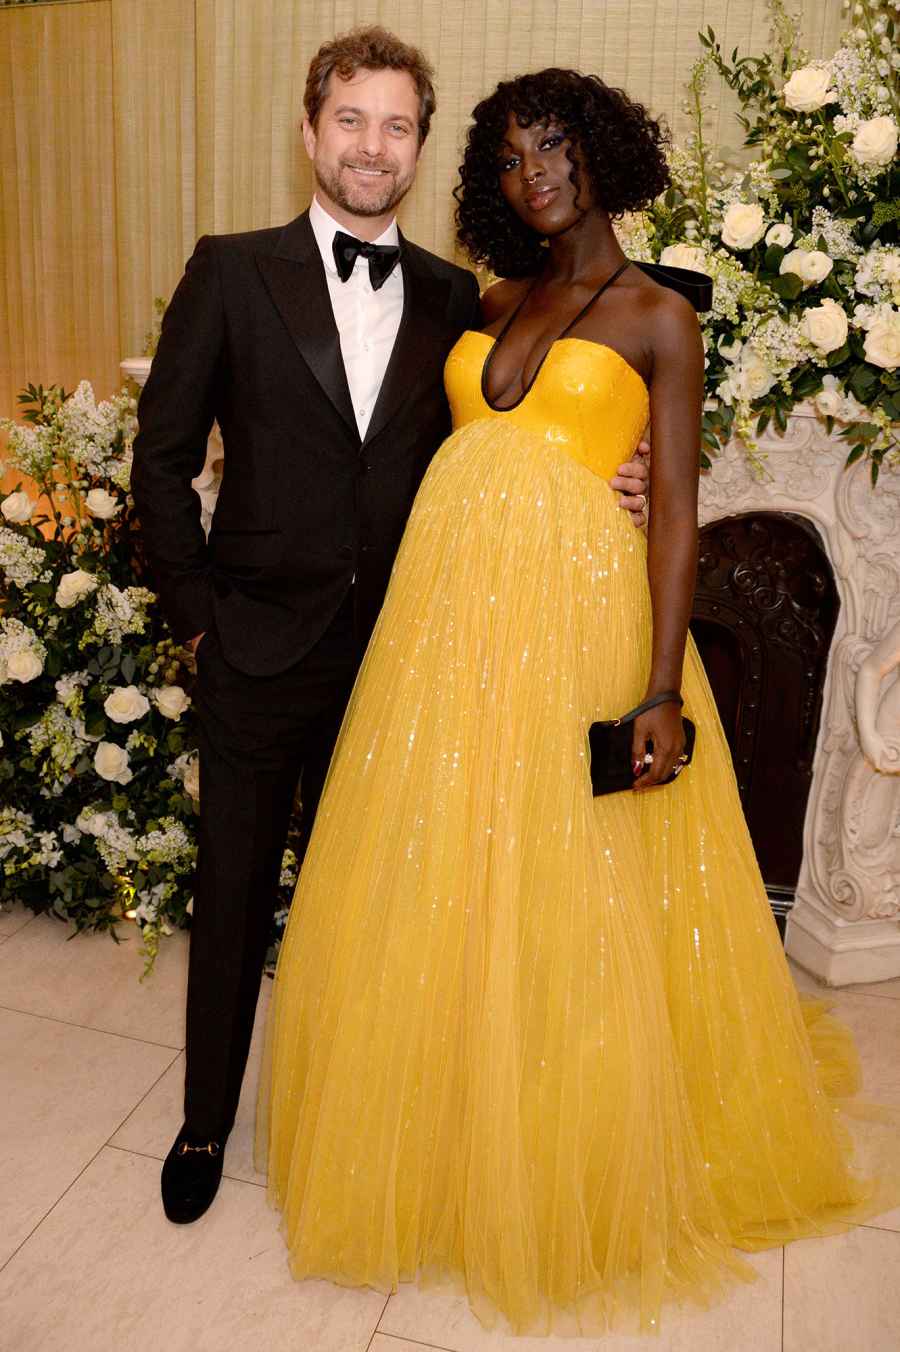 April 2020 Welcome Their 1st Child Together Joshua Jackson and Jodie Turner-Smith Relationship Timeline